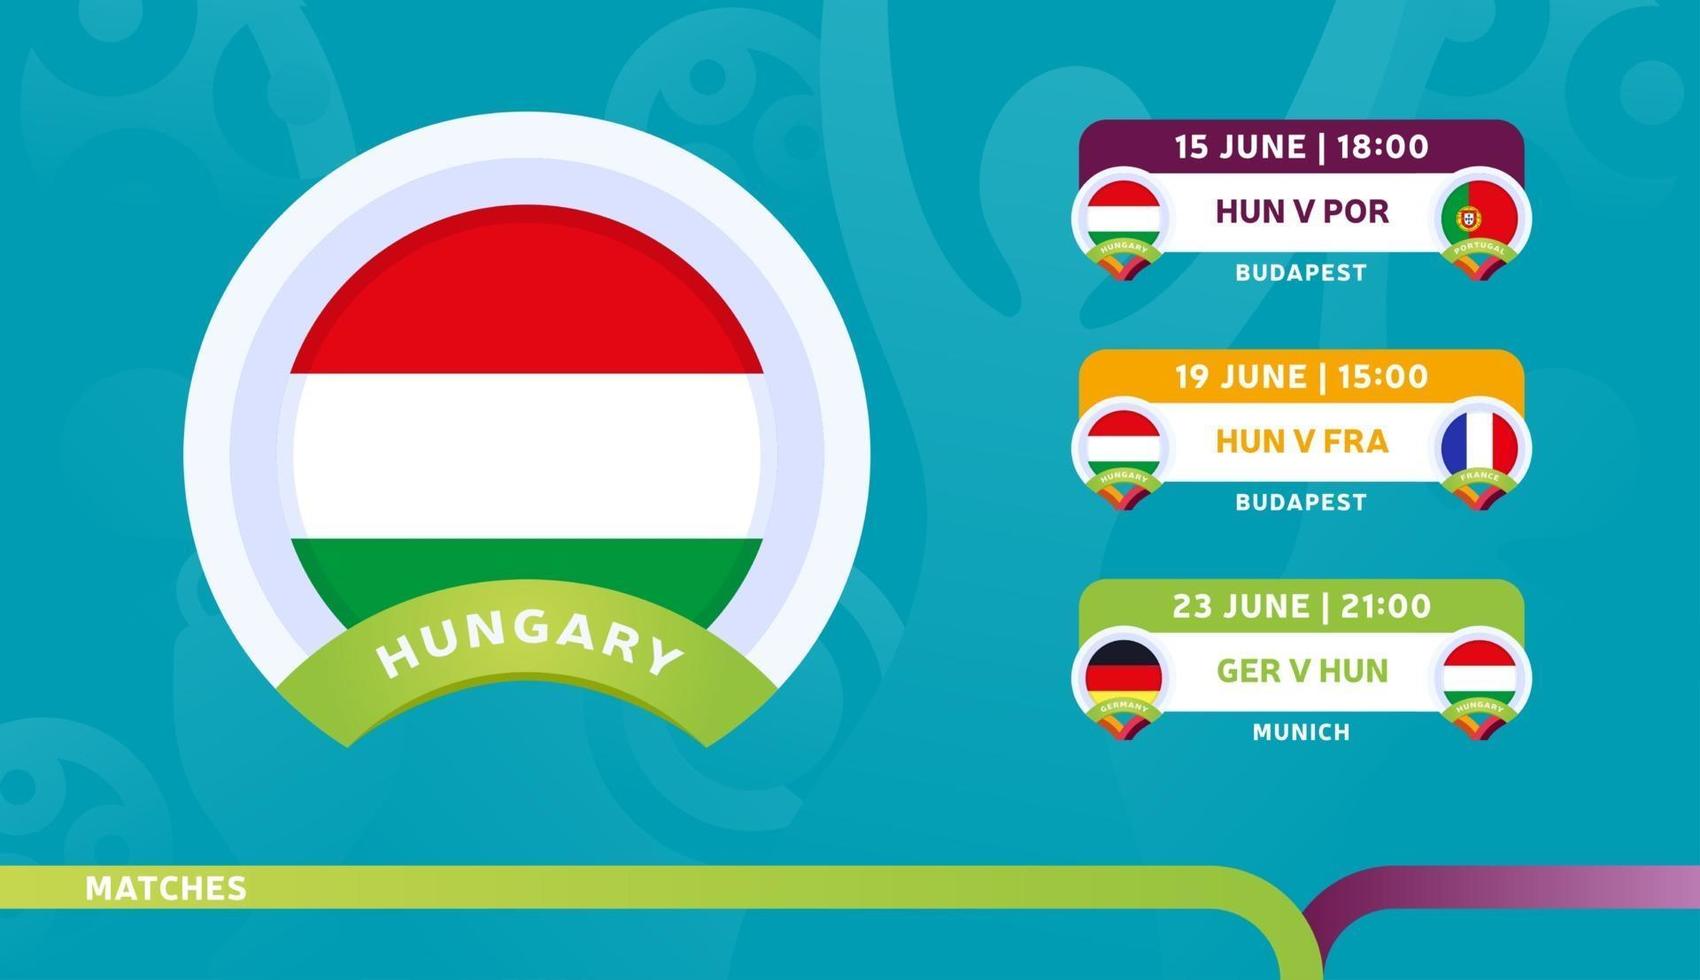 hungary national team Schedule matches in the final stage at the 2020 Football Championship Vector illustration of football 2020 matches